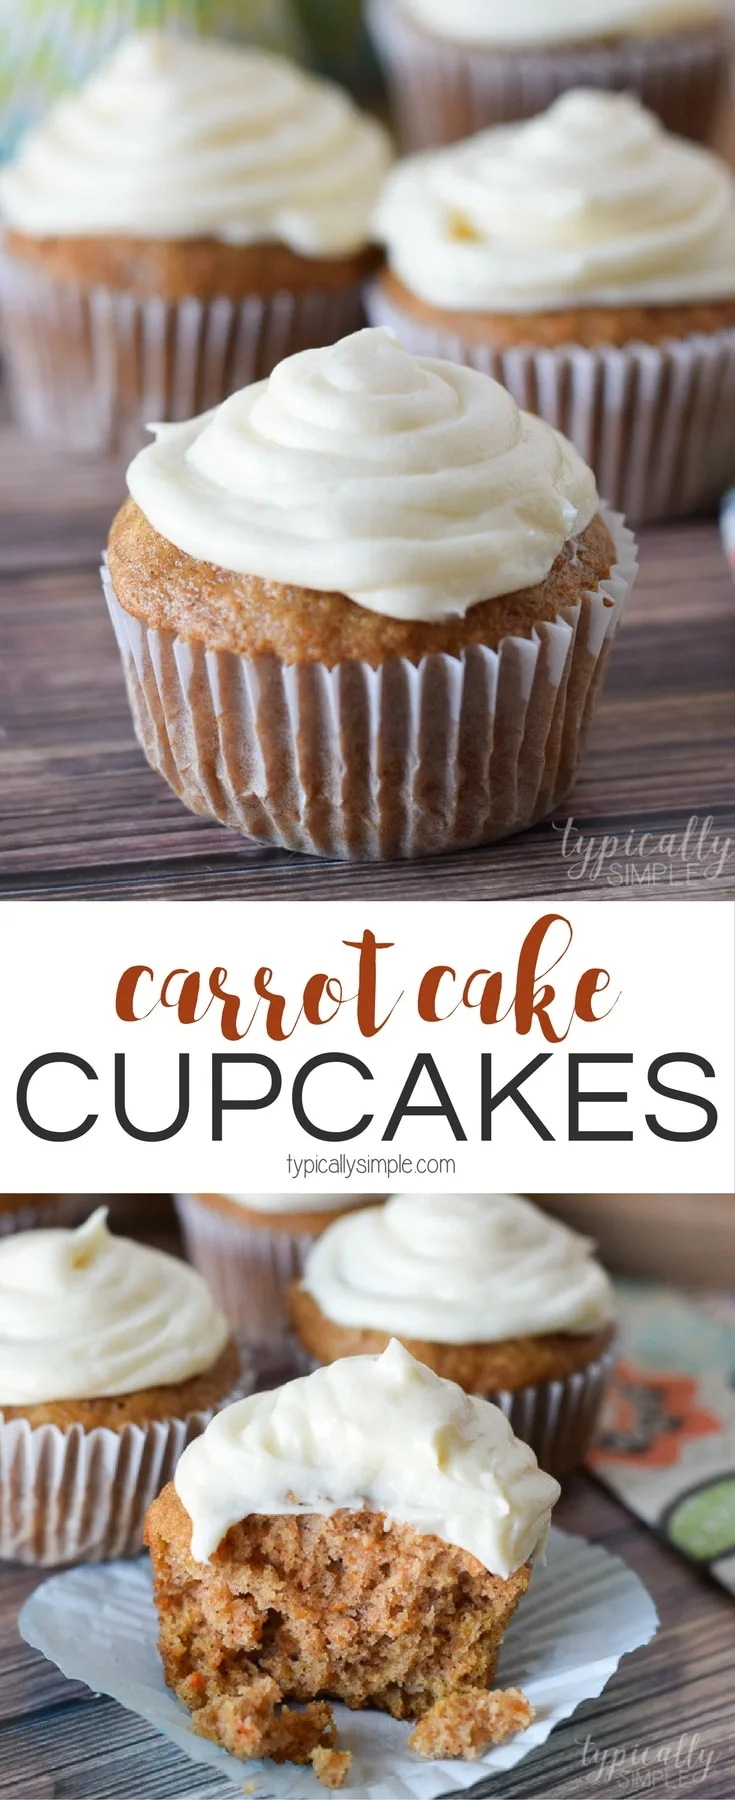 Carrot Cake Cupcakes - Typically Simple